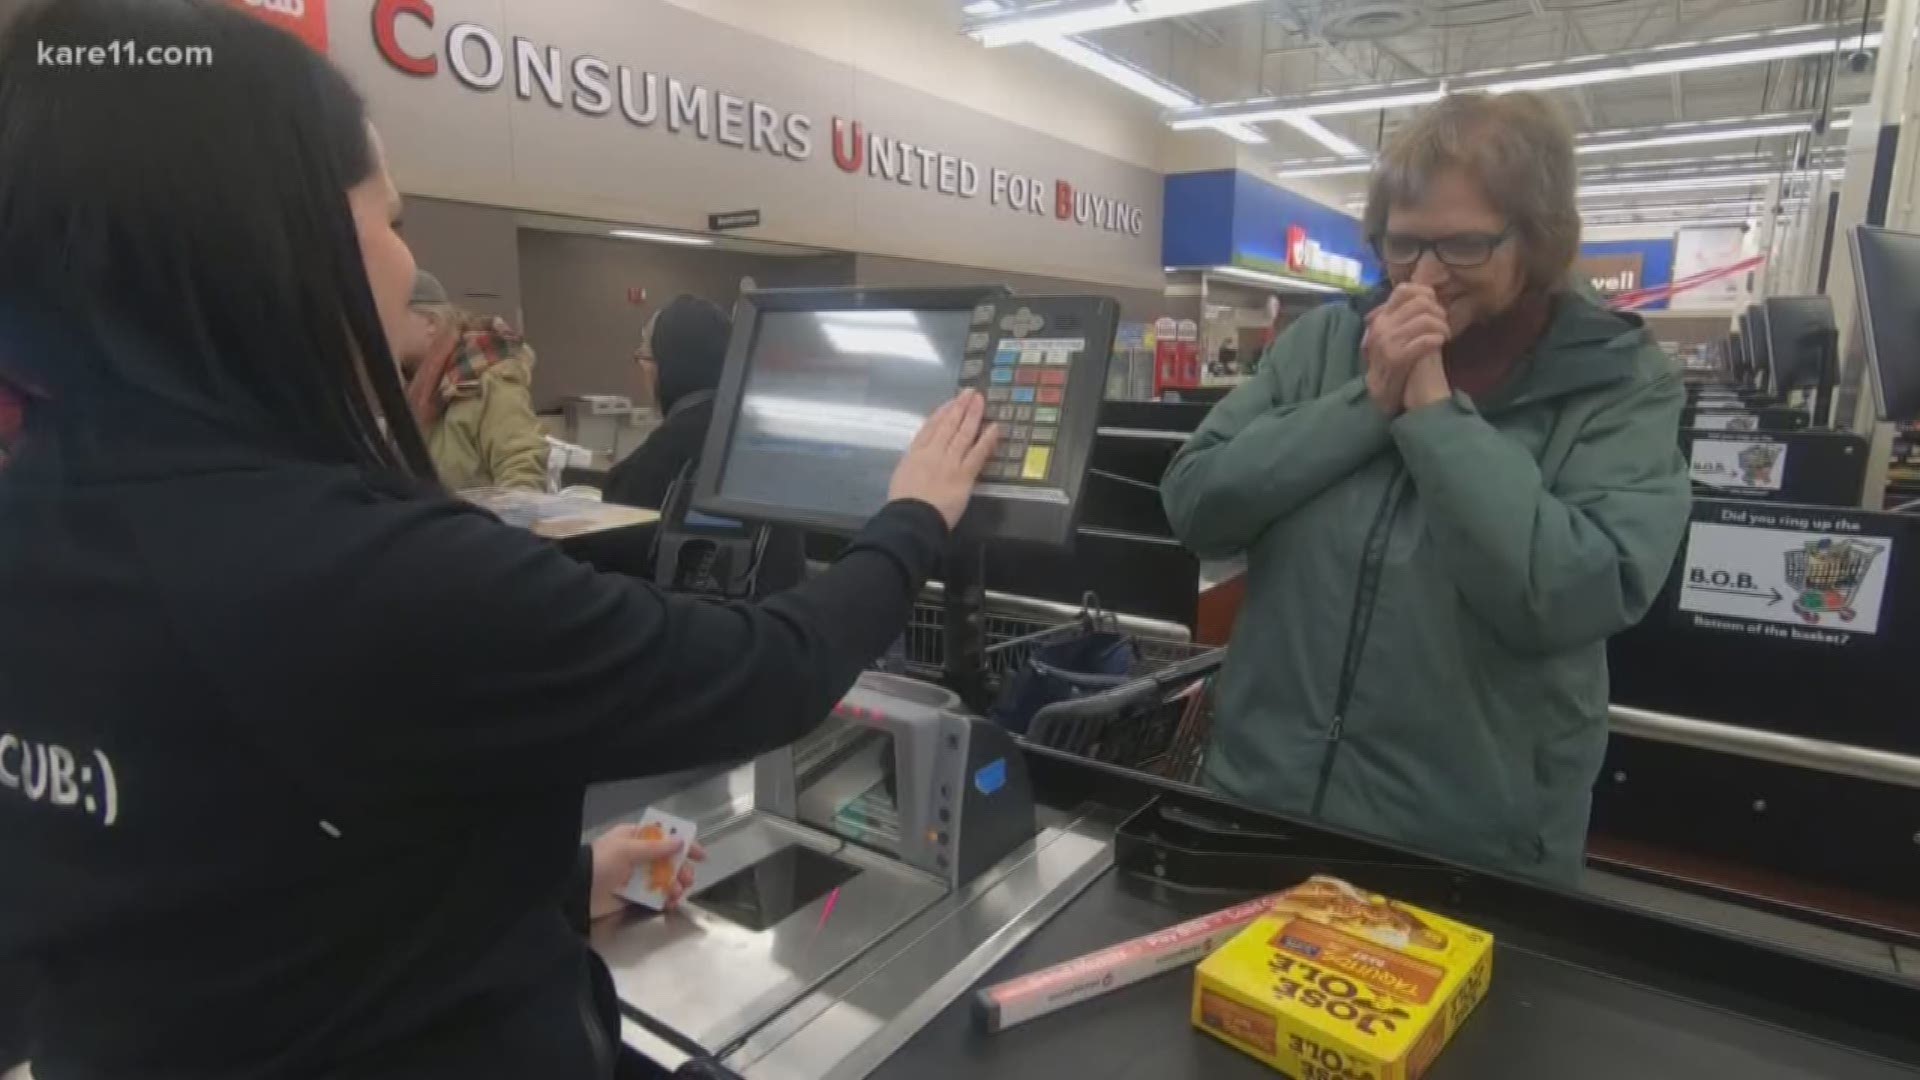 It's Random Acts of Kindness Week, and KARE 11's Alicia Lewis is kicking things off with Cub Foods. Watch the reaction from shoppers as we pay for their groceries!